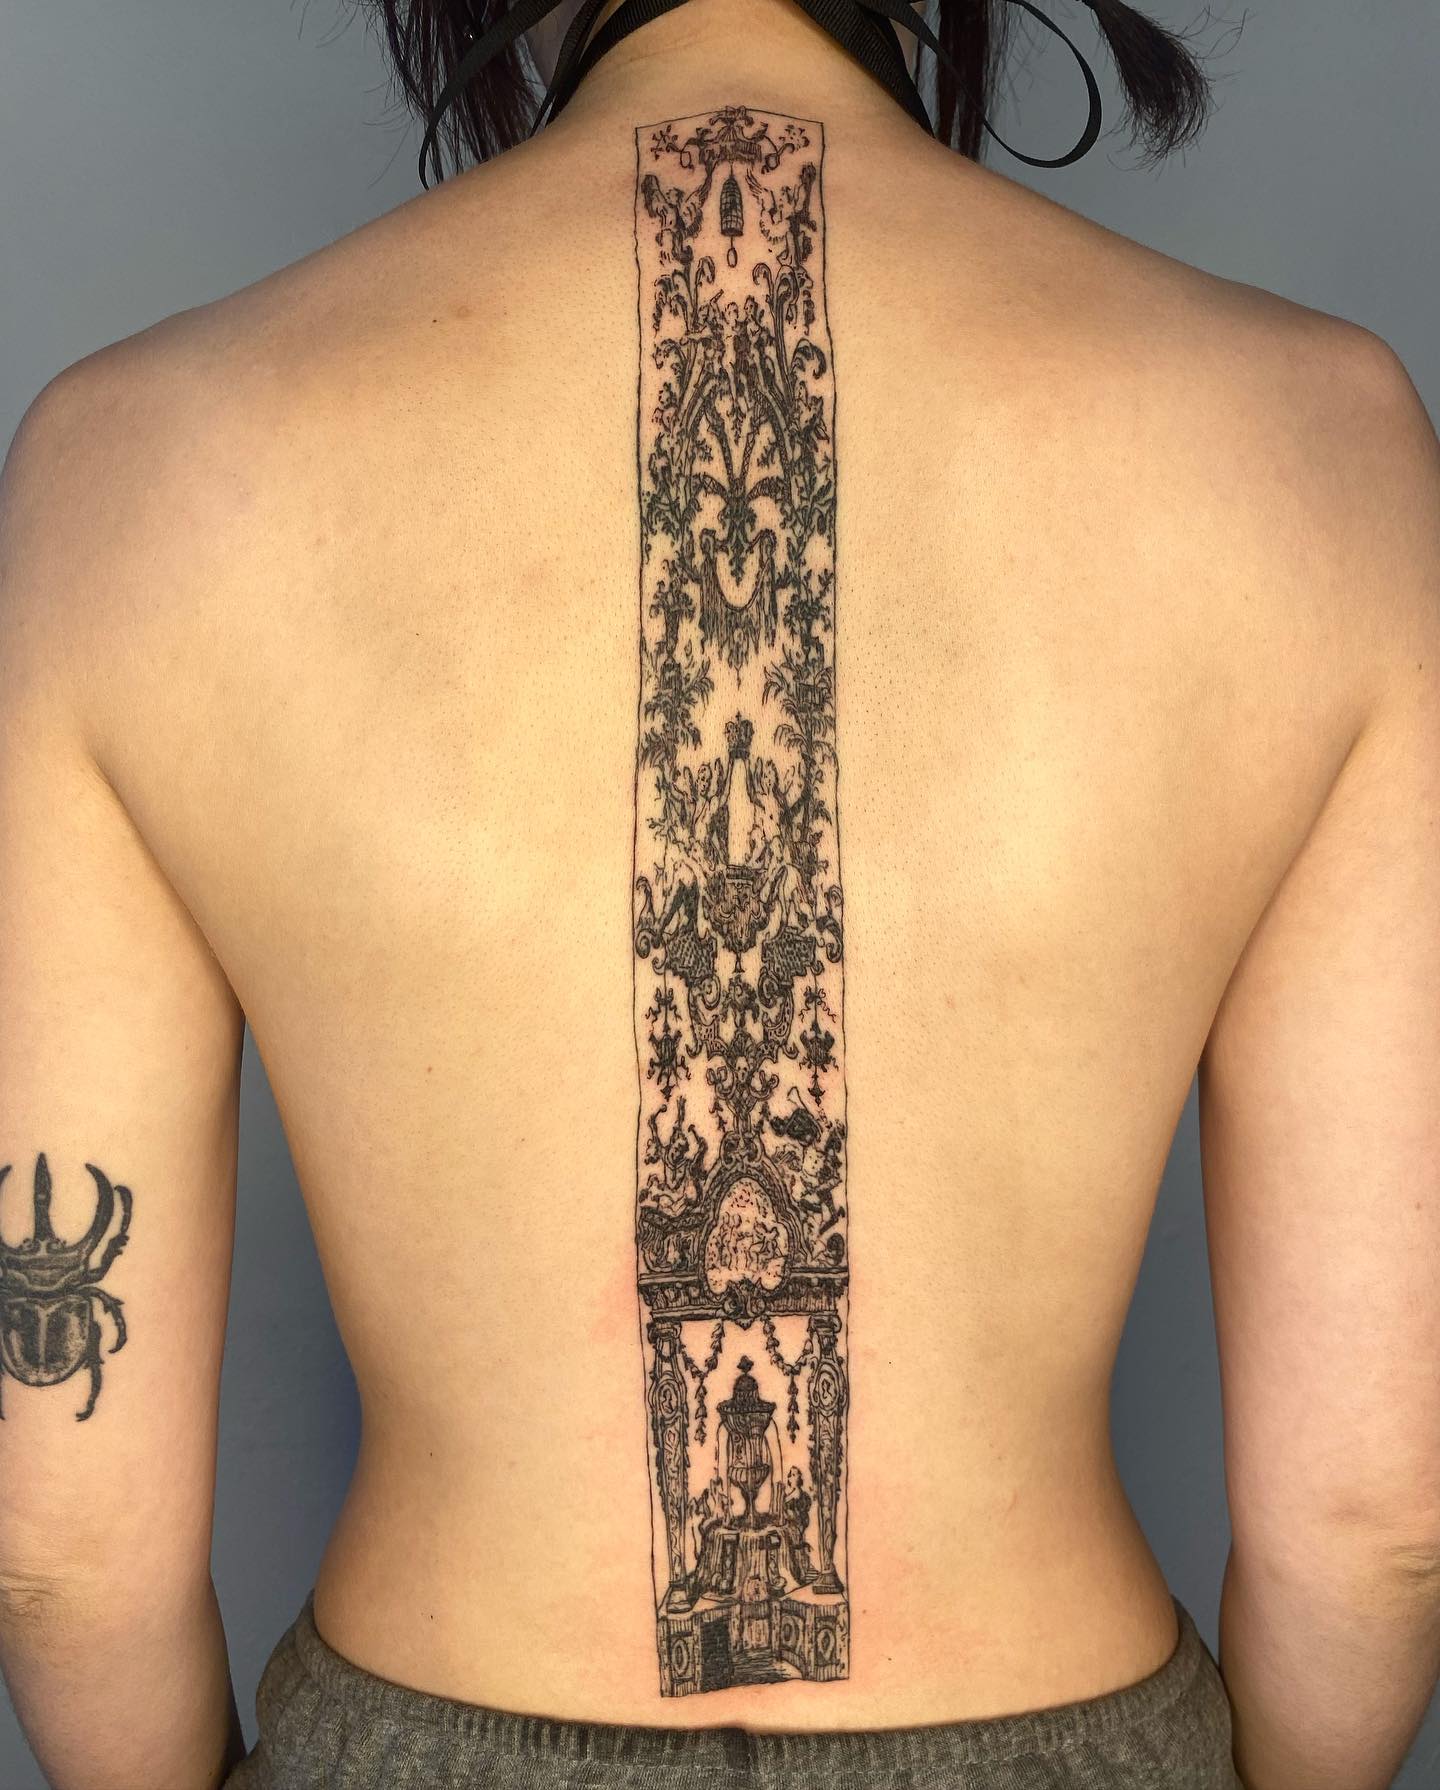 Black inked spine design by shell station tattoo